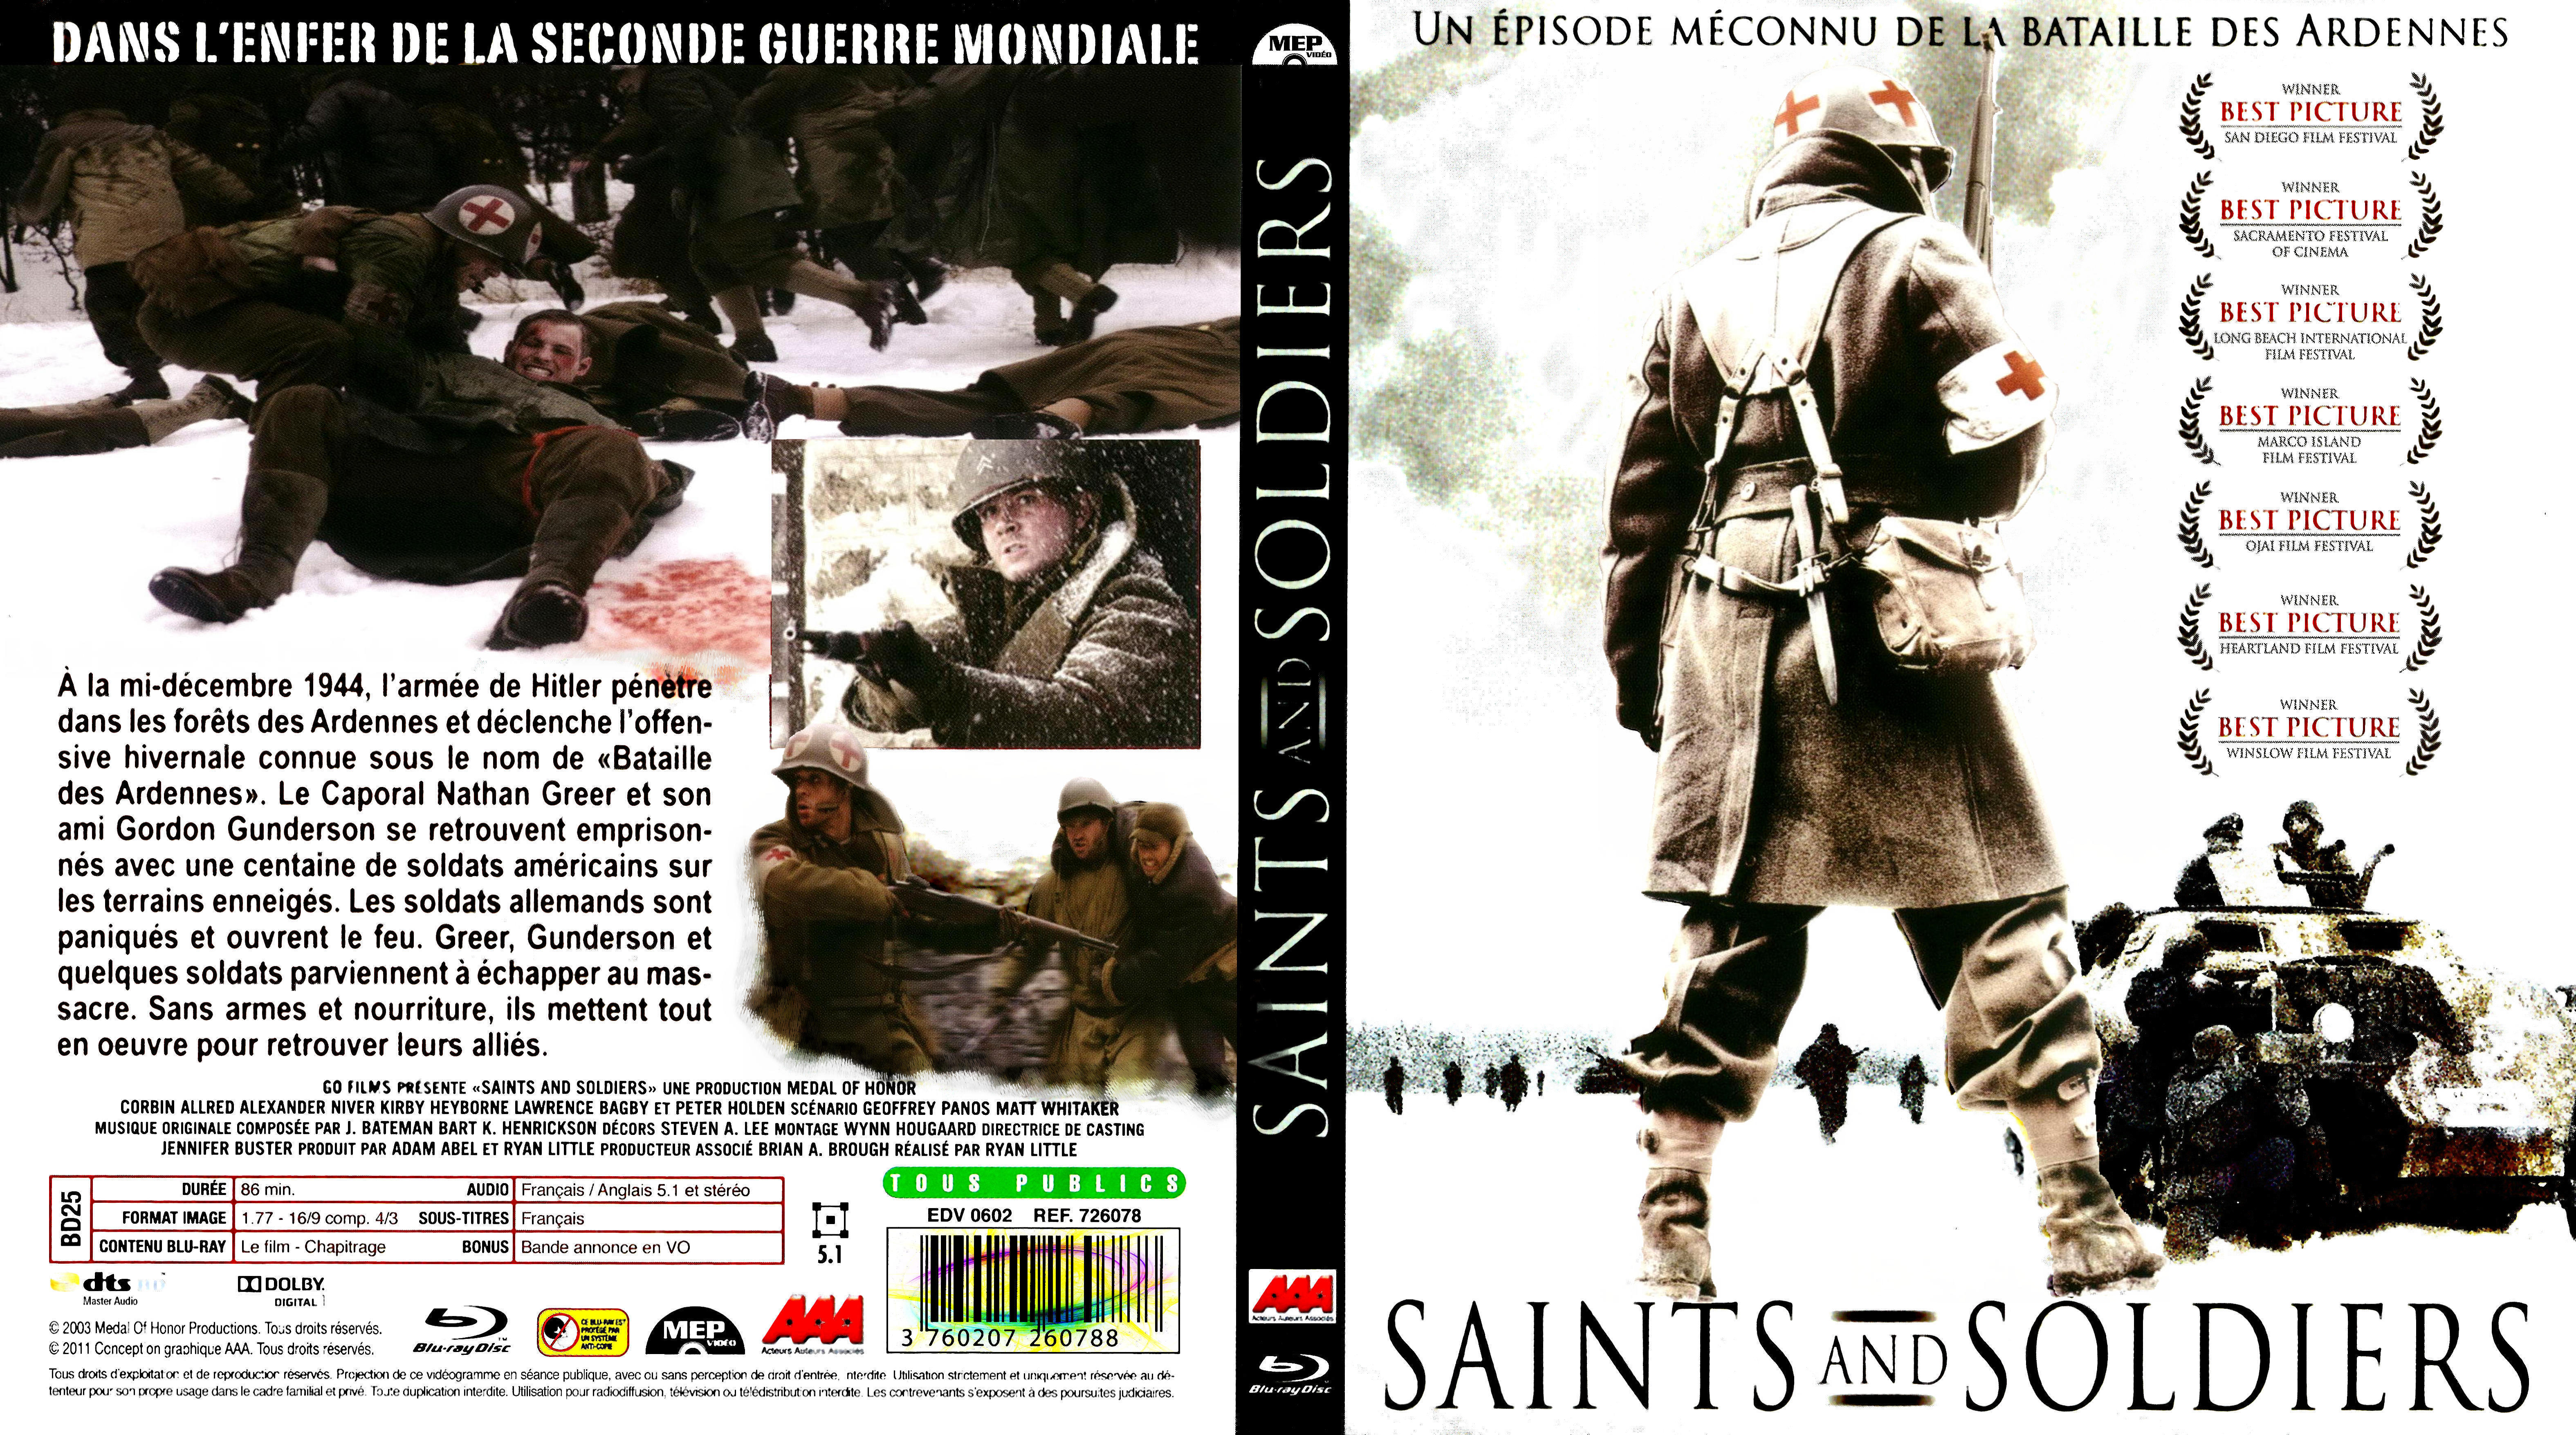 Jaquette DVD Saints and soldiers (BLU-RAY)